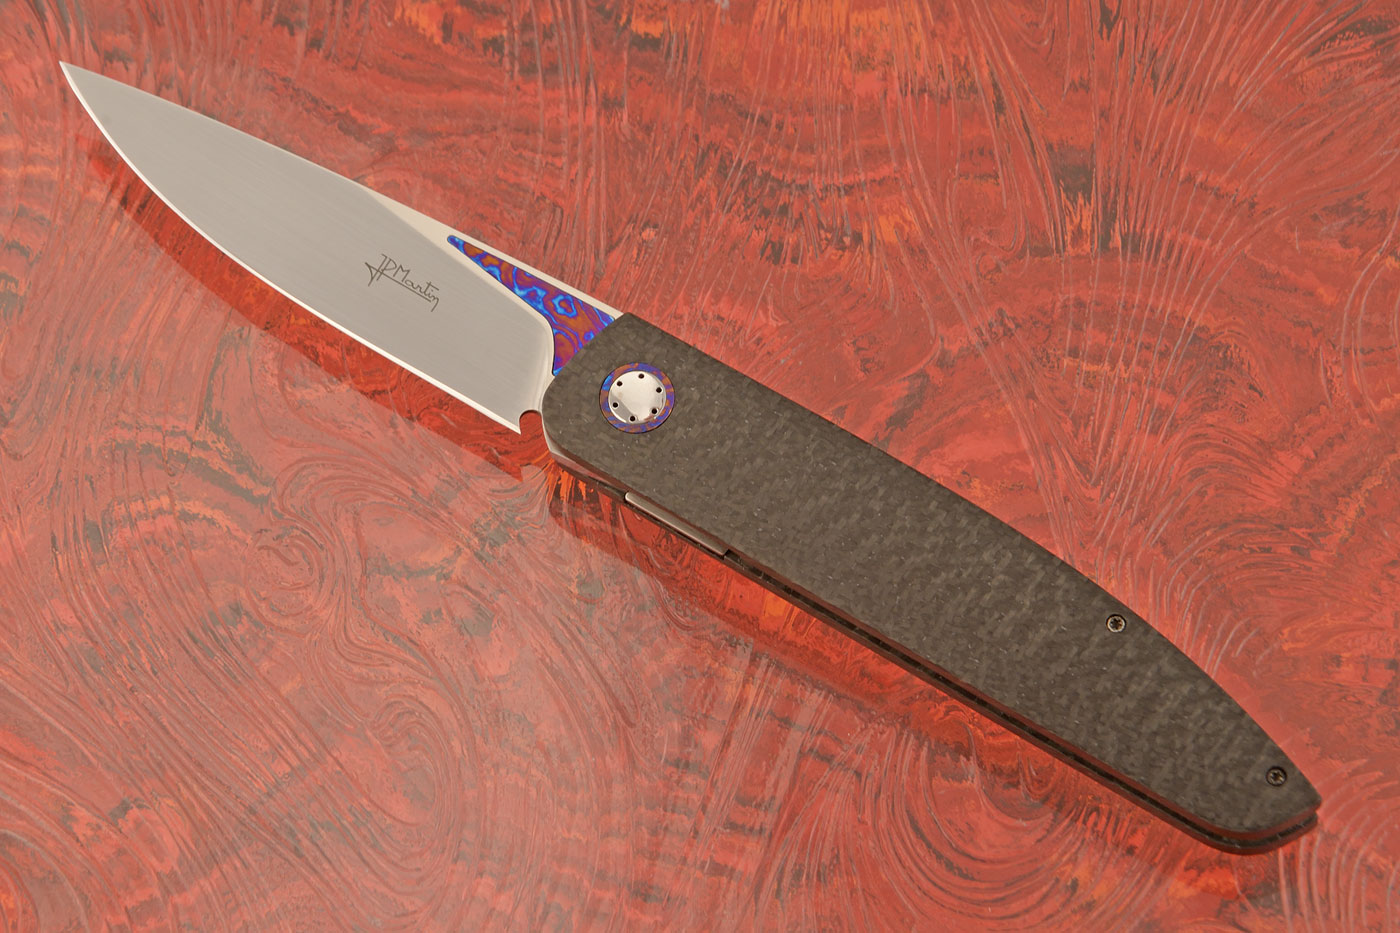 City Light Front Flipper with Mokuti and Carbon Fiber - RWL-34 - PROTOTYPE